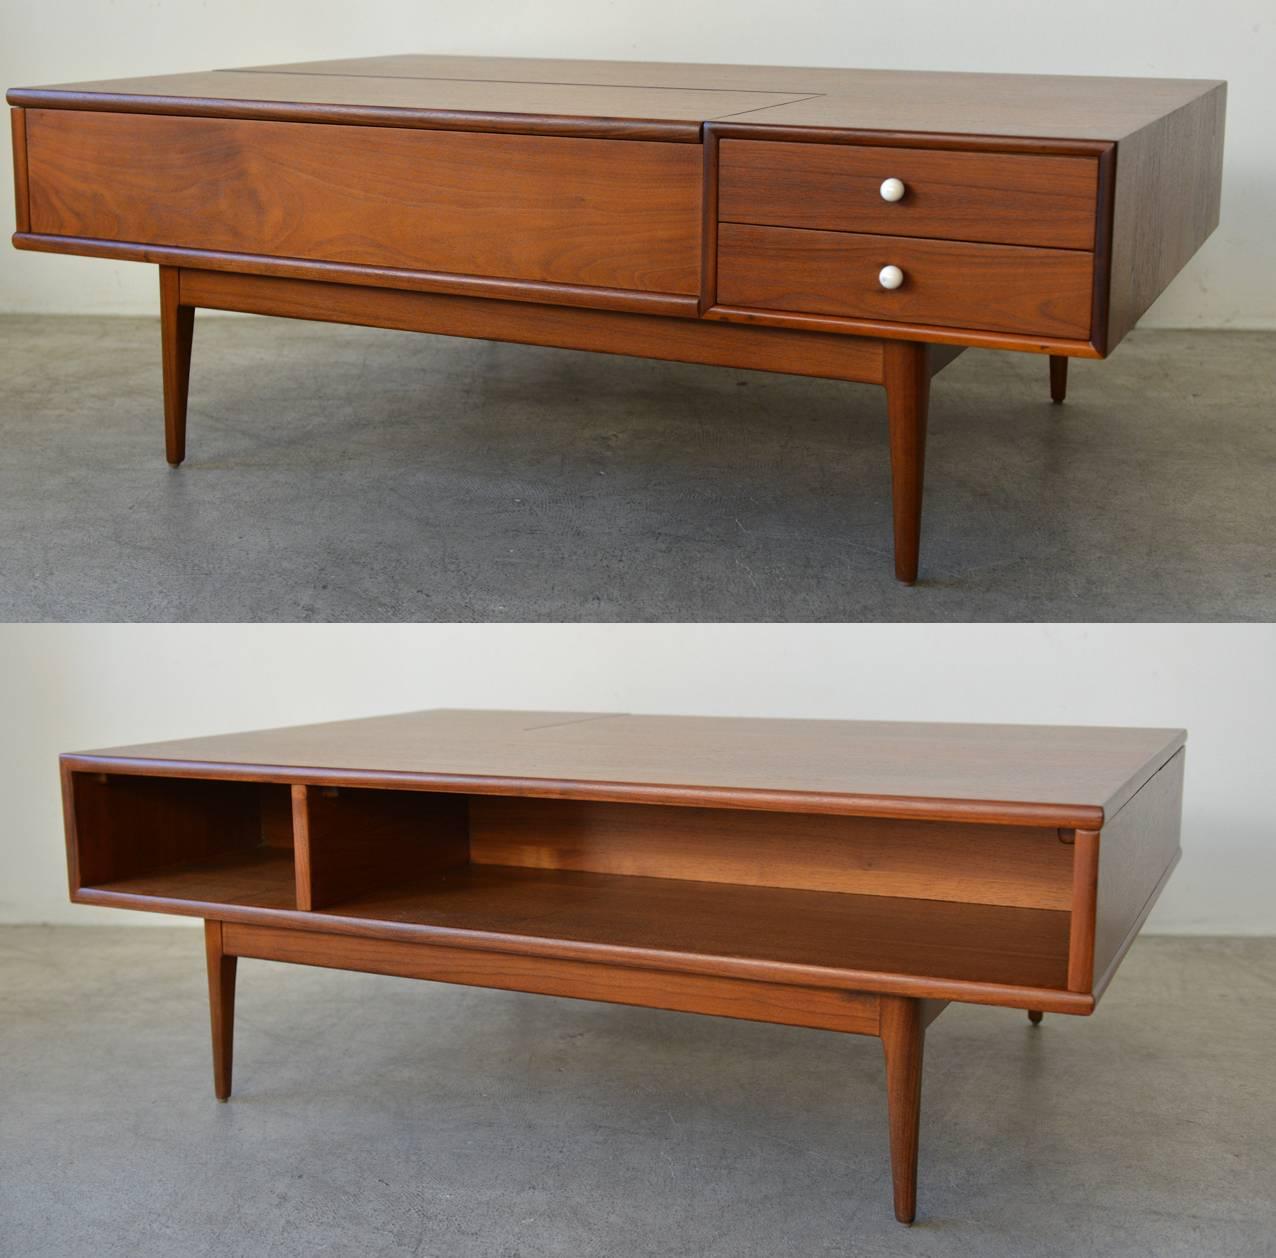 Beautiful Kipp Stewart Drexel Declaration coffee table.
This is made of beautiful rich walnut with a hidden interior storage and two drawers with the original round porcelain pulls. The opposite side has two open storage compartments. This table is